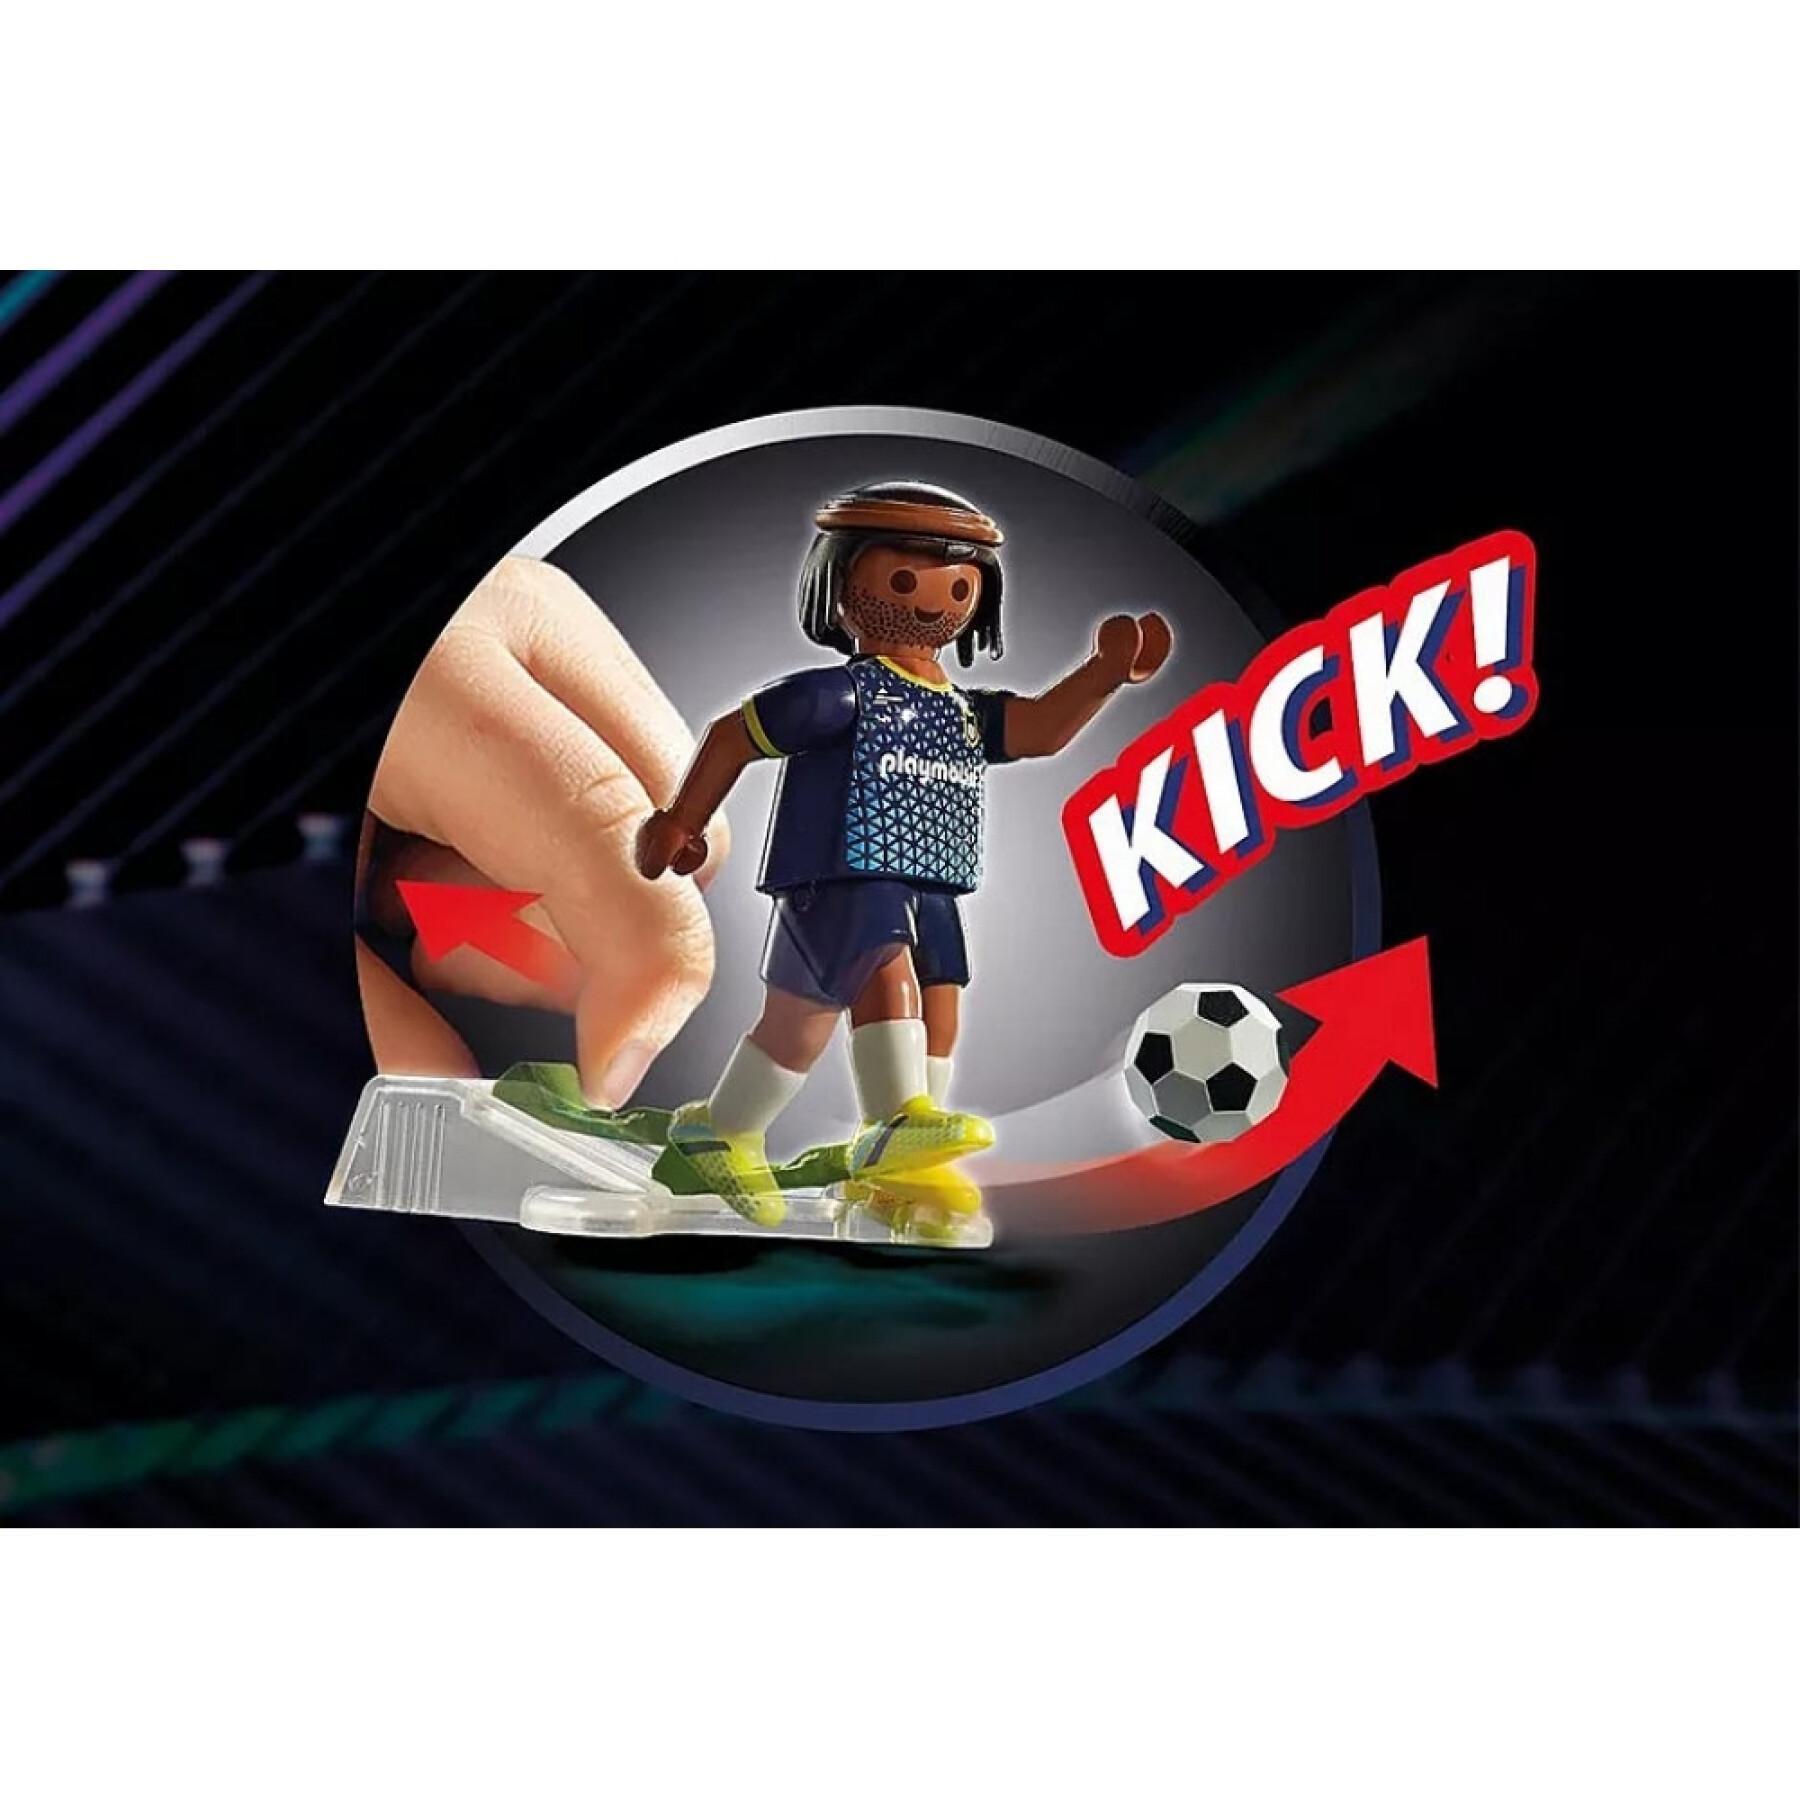 Action games soccer pitch stadium Playmobil